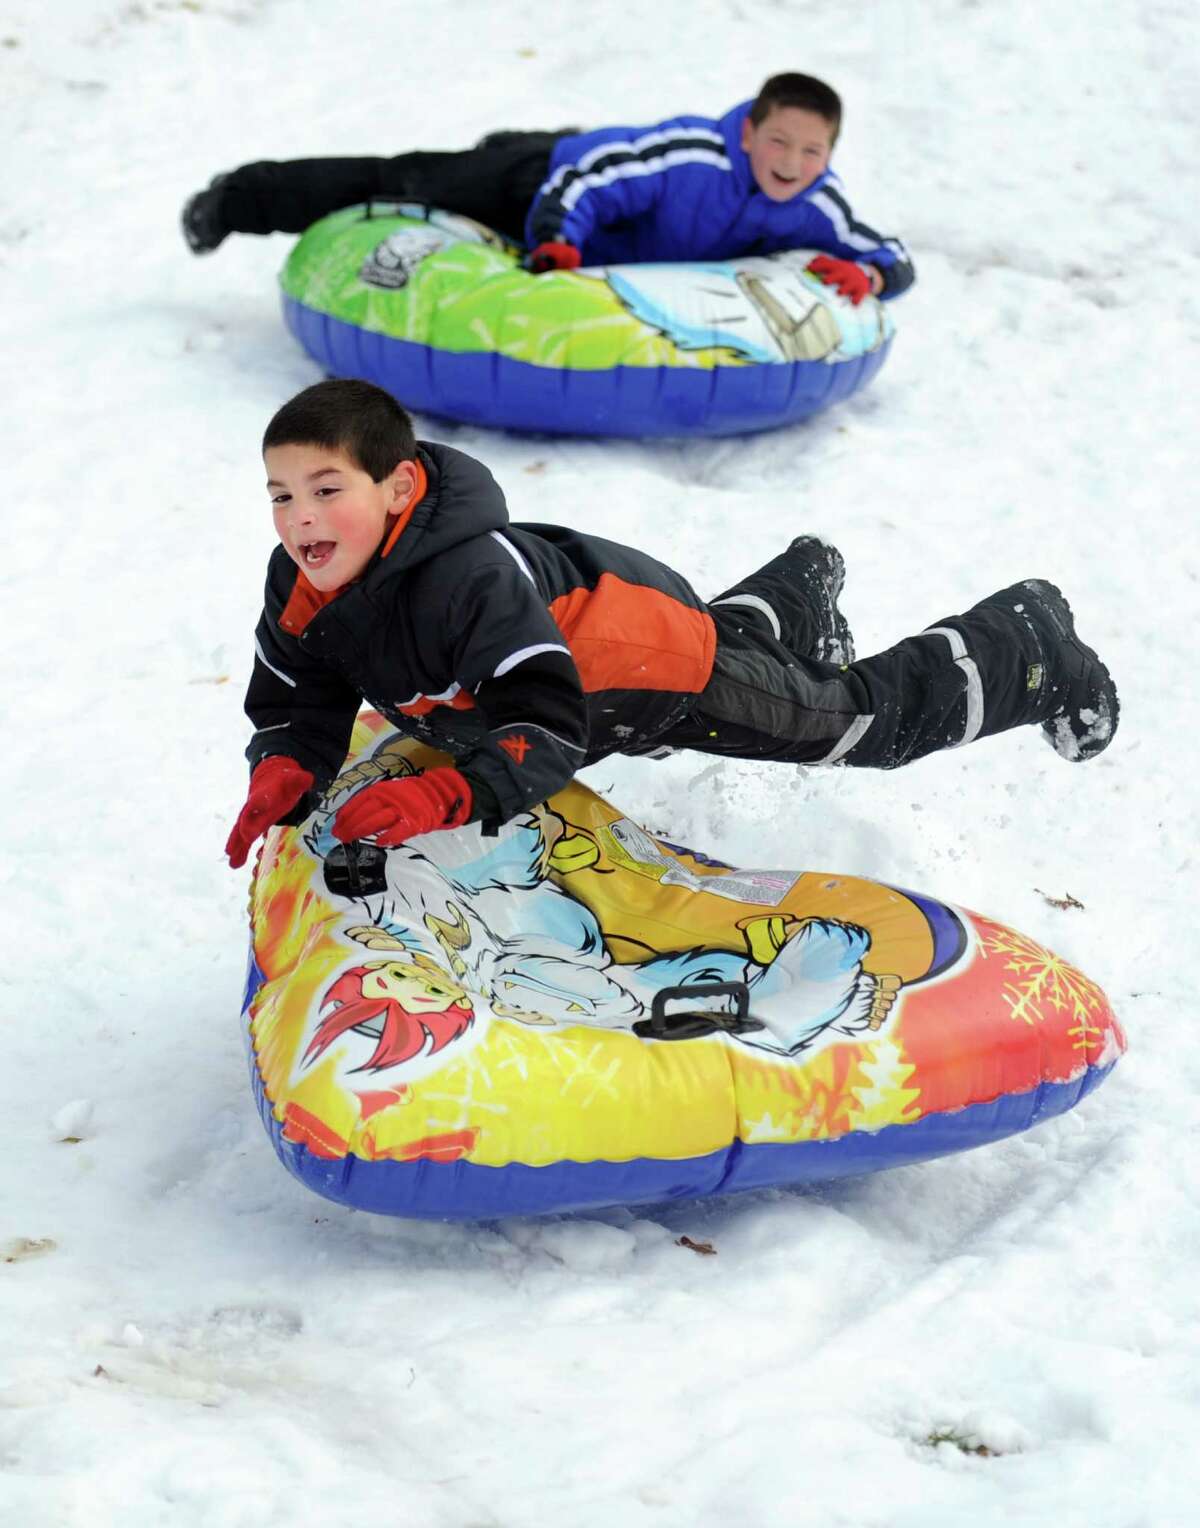 Michael Anroman, 7, of Seymour, goes over a bump while sledding behind Derby Middle School Thursday, Nov. 8, 2012 followed by his brother Johnny, 9.